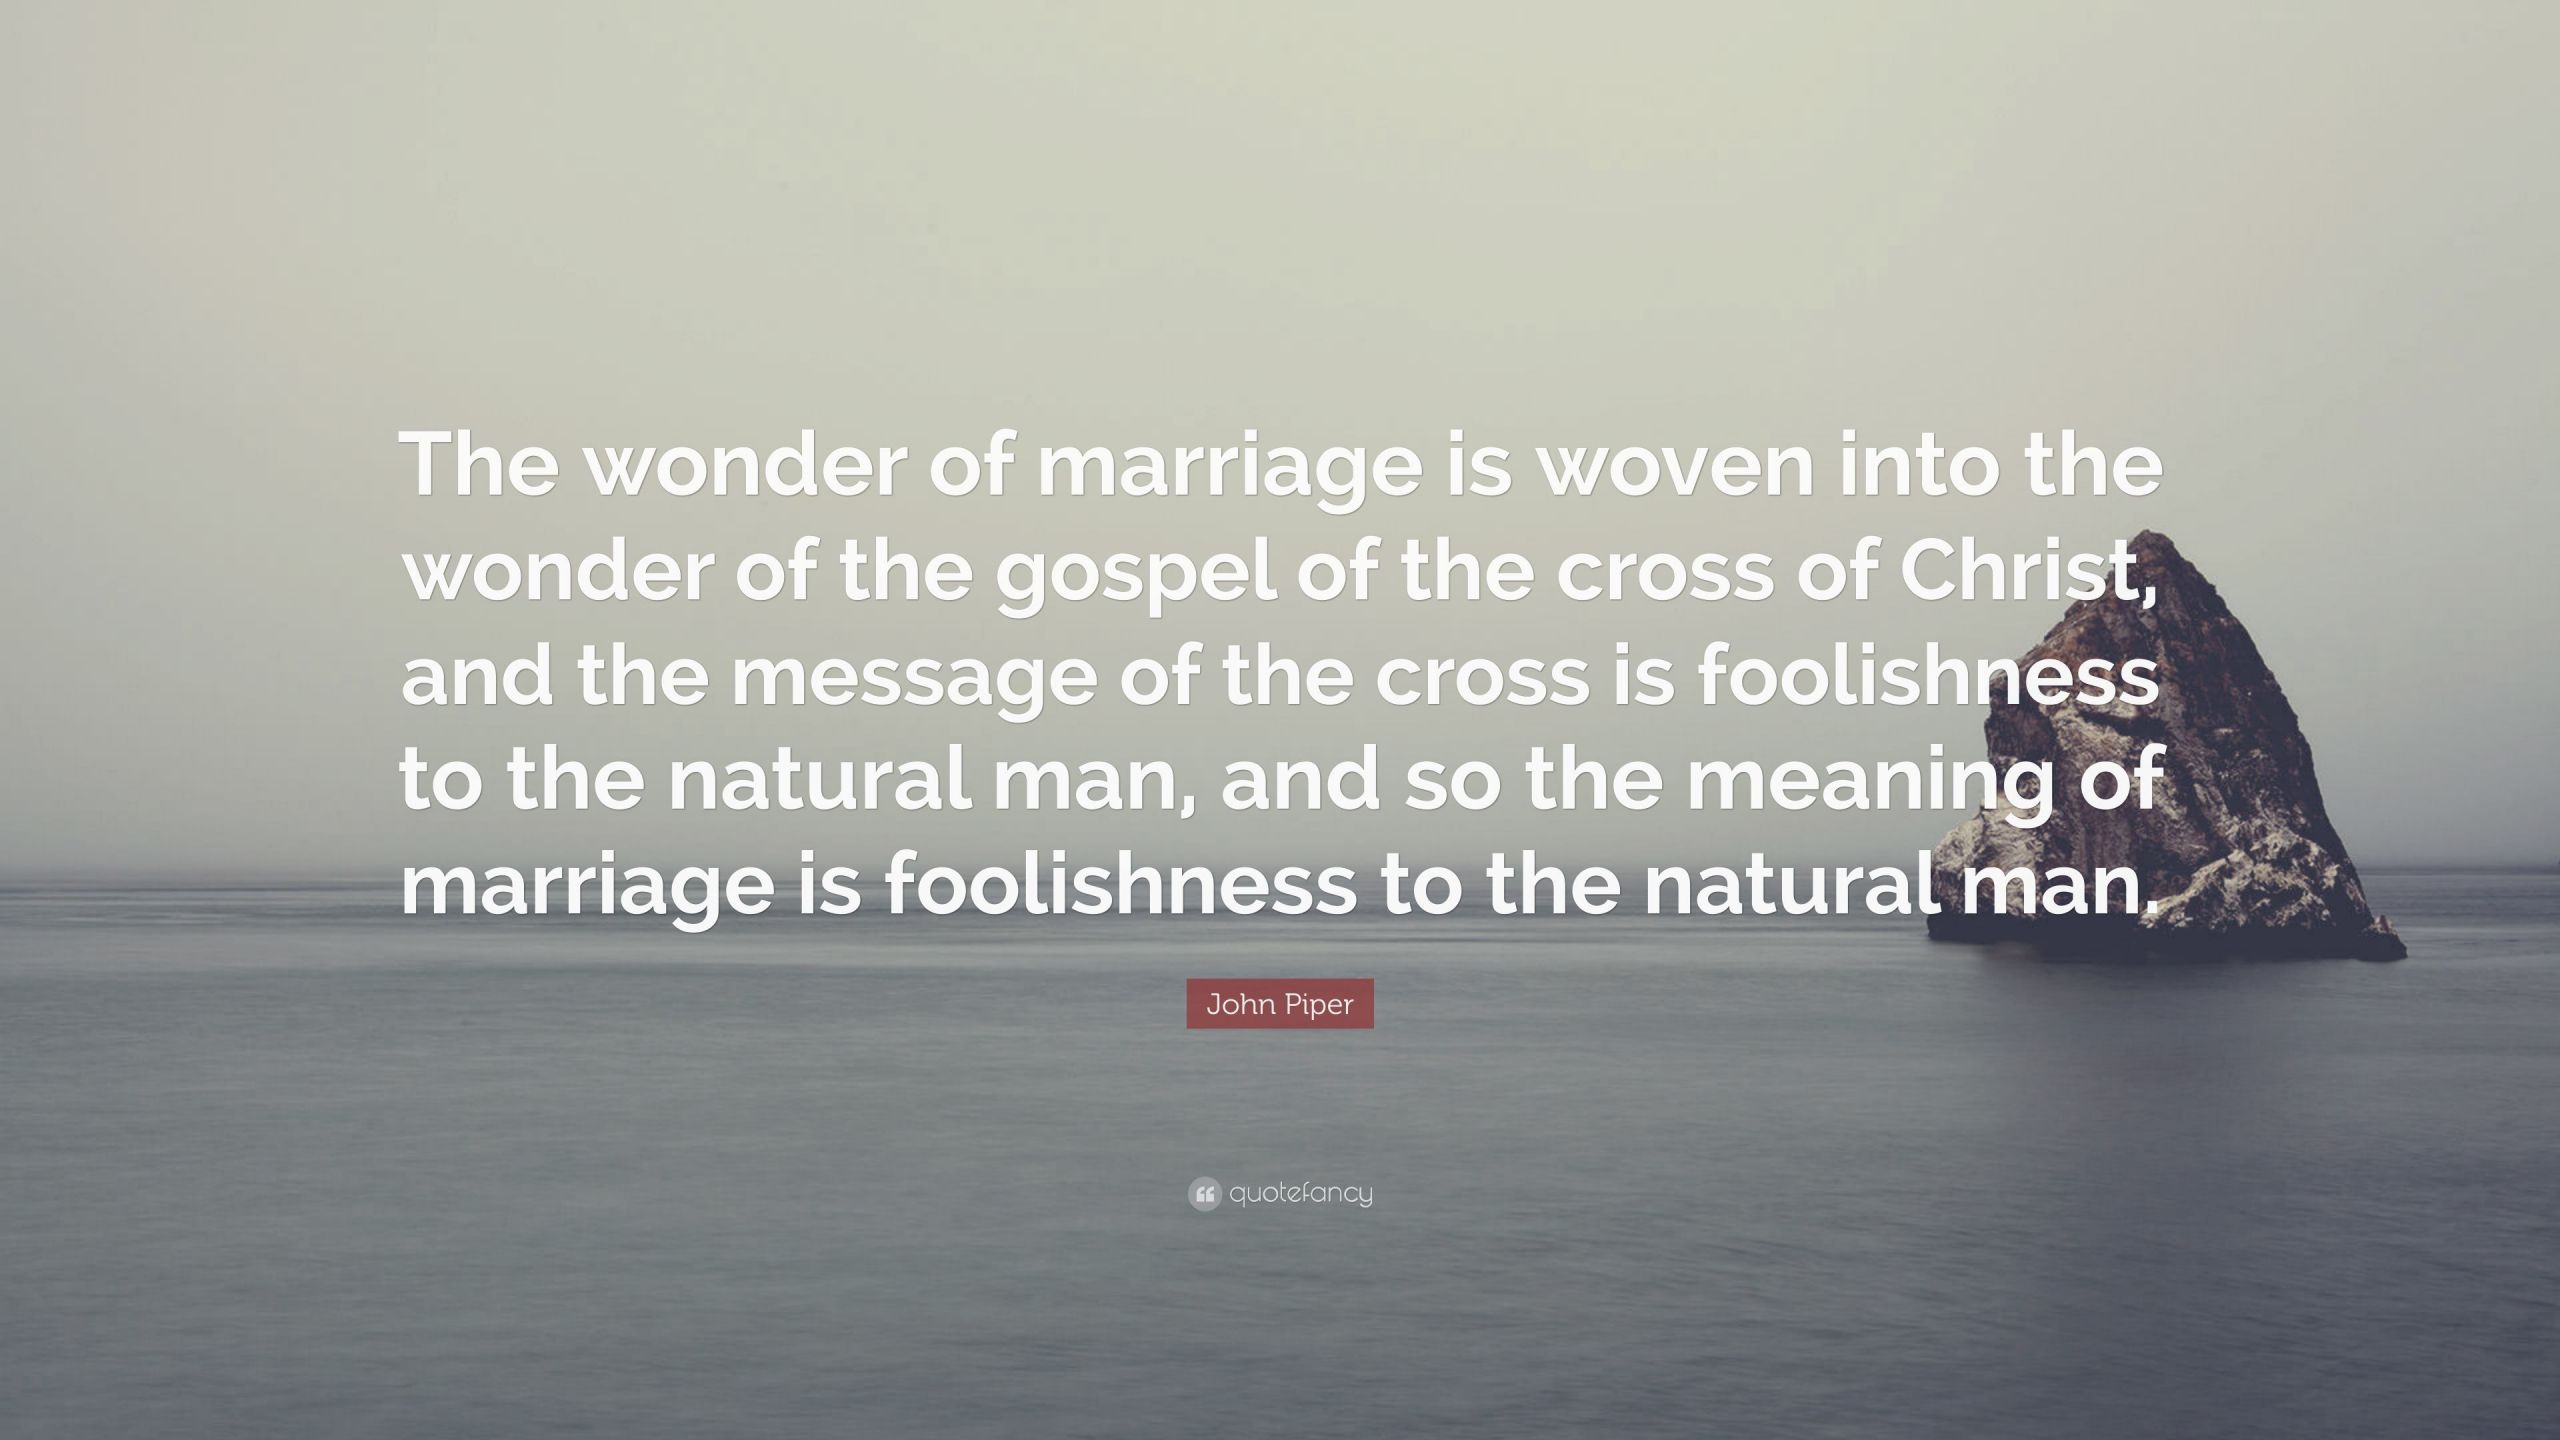 John Piper Marriage Quote
 John Piper Quote “The wonder of marriage is woven into